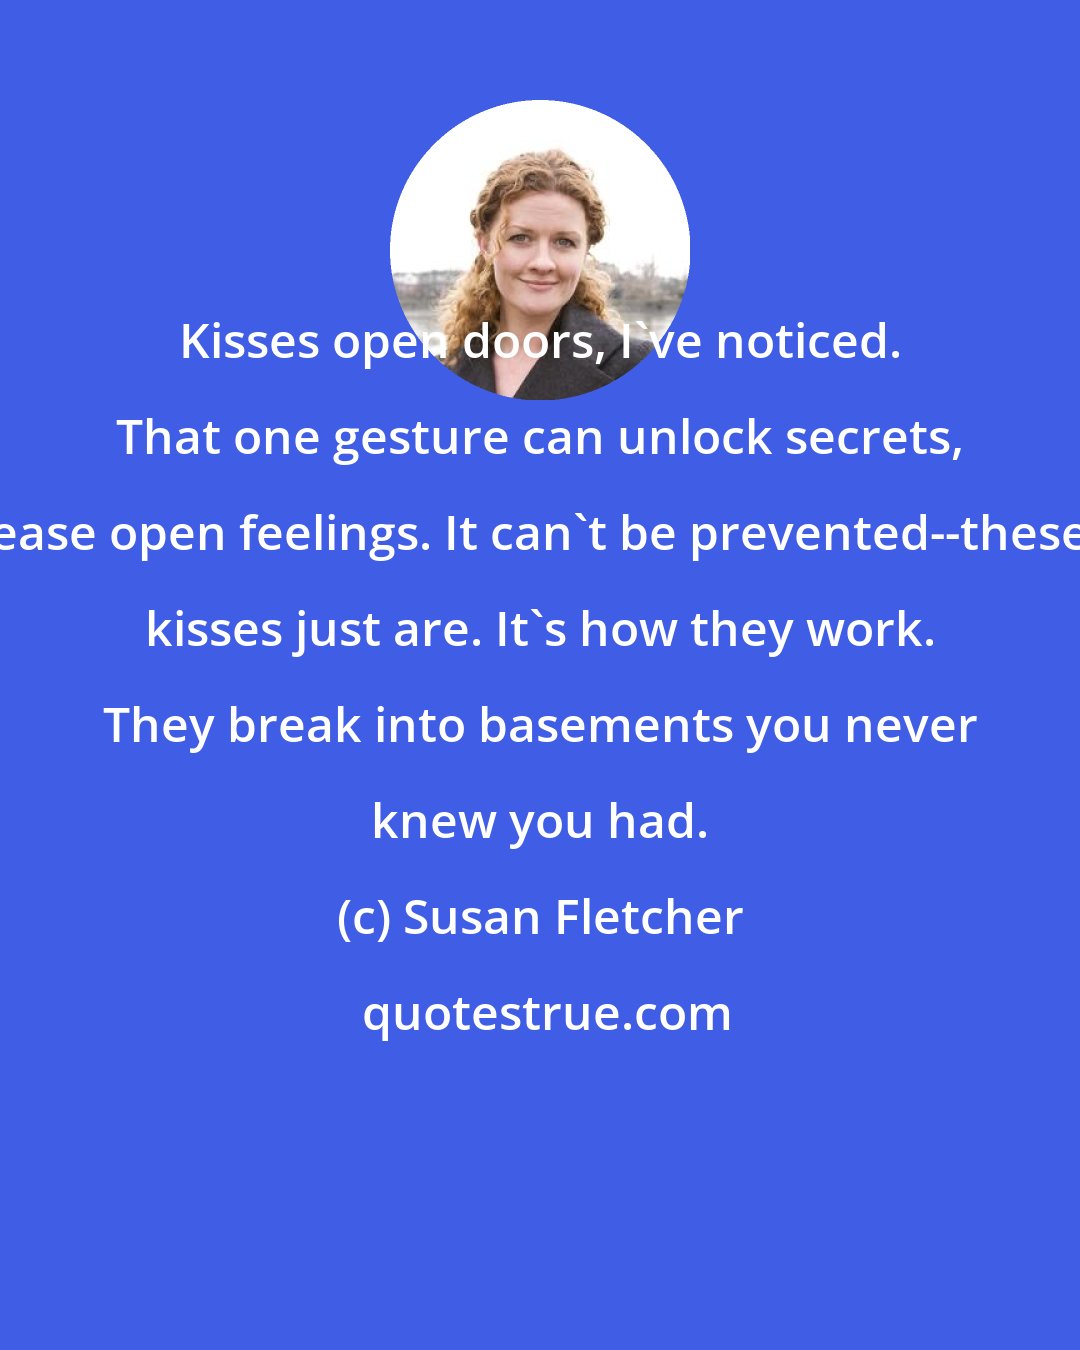 Susan Fletcher: Kisses open doors, I've noticed. That one gesture can unlock secrets, ease open feelings. It can't be prevented--these kisses just are. It's how they work. They break into basements you never knew you had.